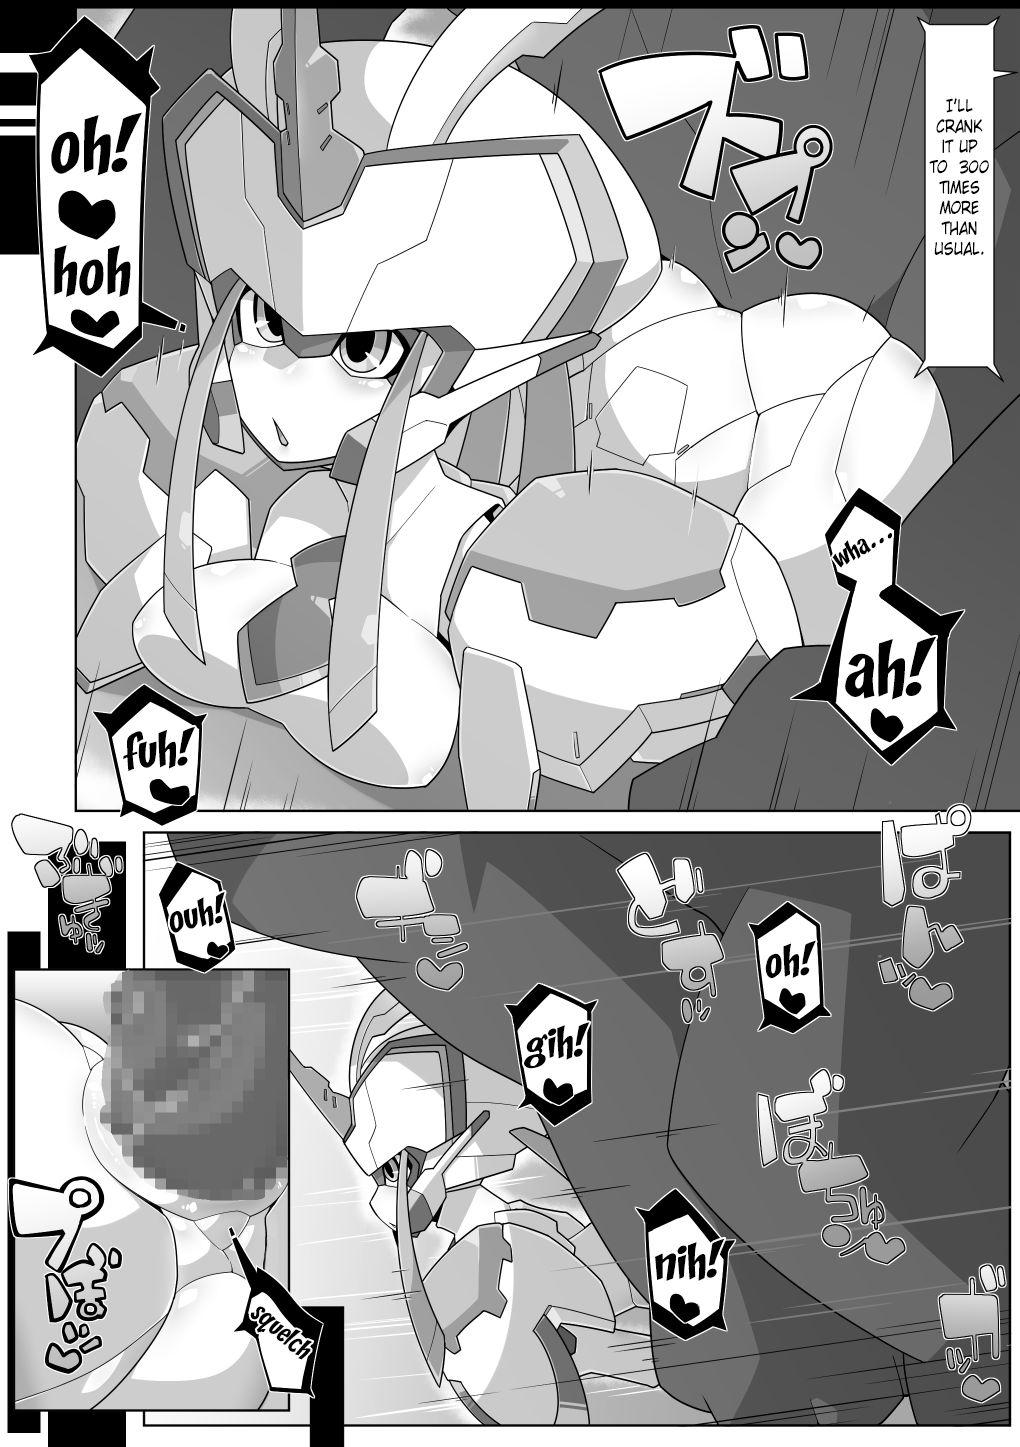 Real Amatuer Porn (C94) [Workaholic (Kni)] robo-hentai-book - Darling in the franxx Camera - Page 4